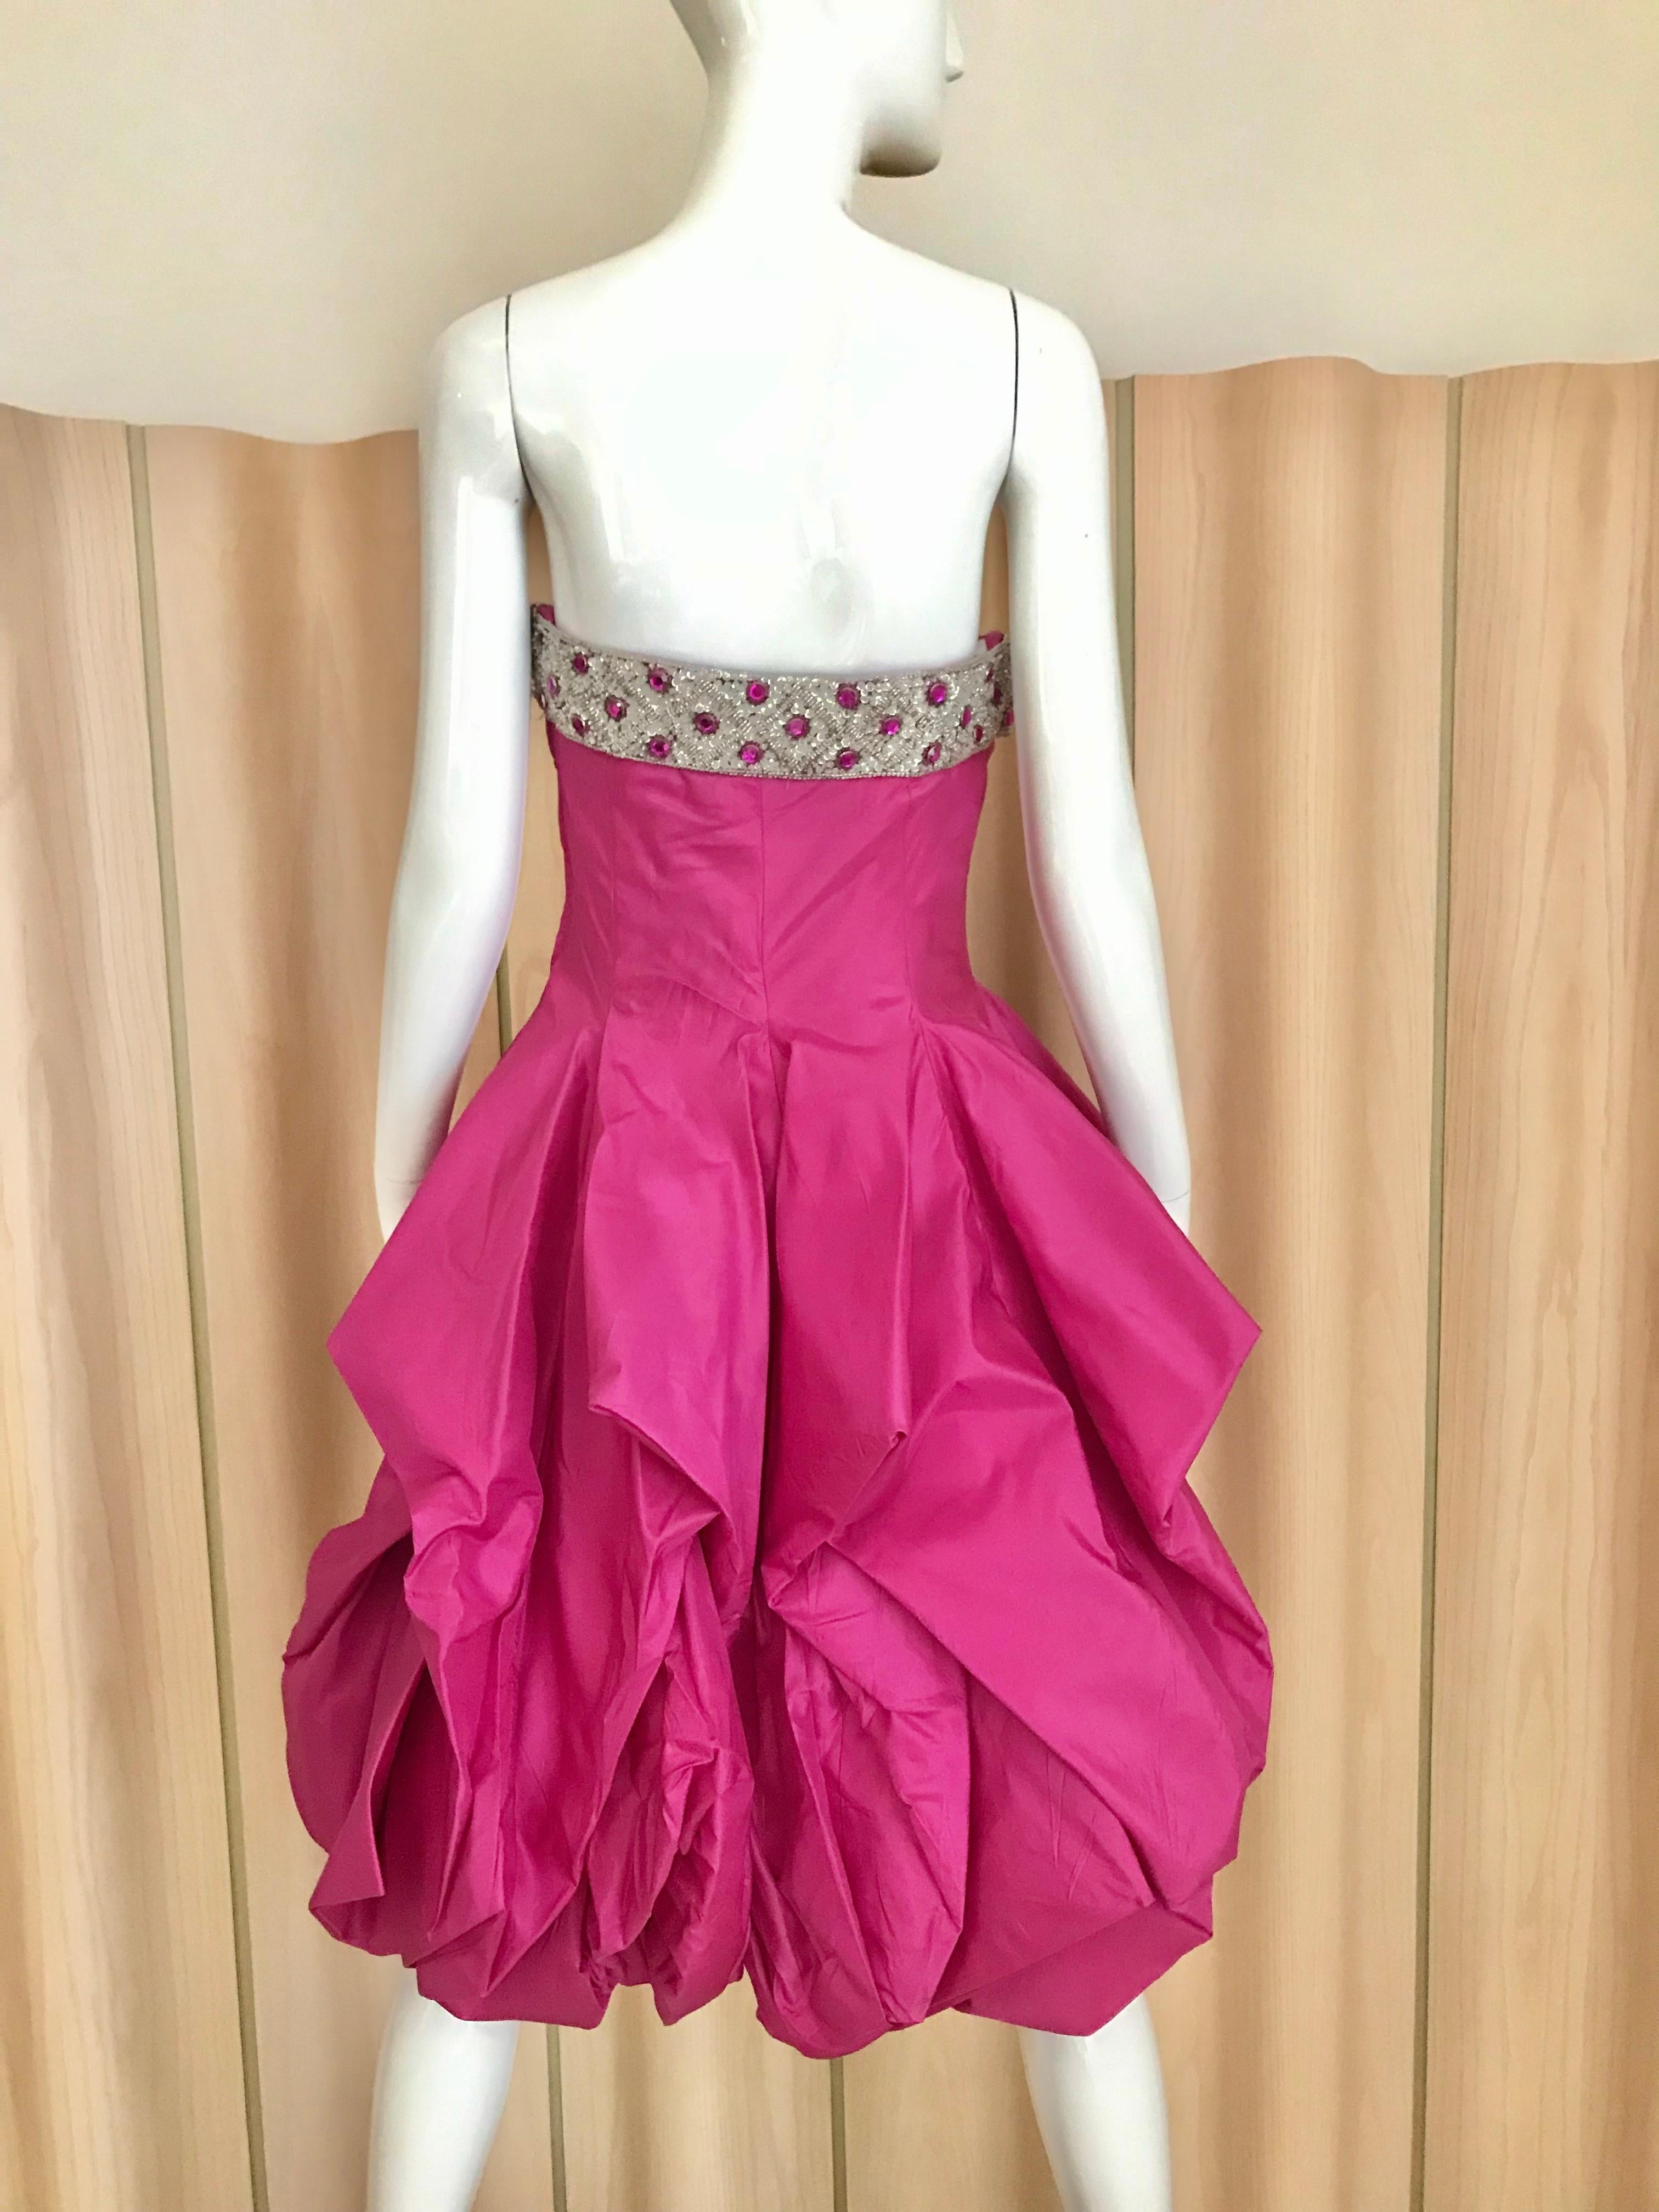 Vintage 1950s Hot pink silk strapless cocktail dress with beaded bust and peplum hem.
Bust: 34 inches / Waist: 29” / dress length ; 33